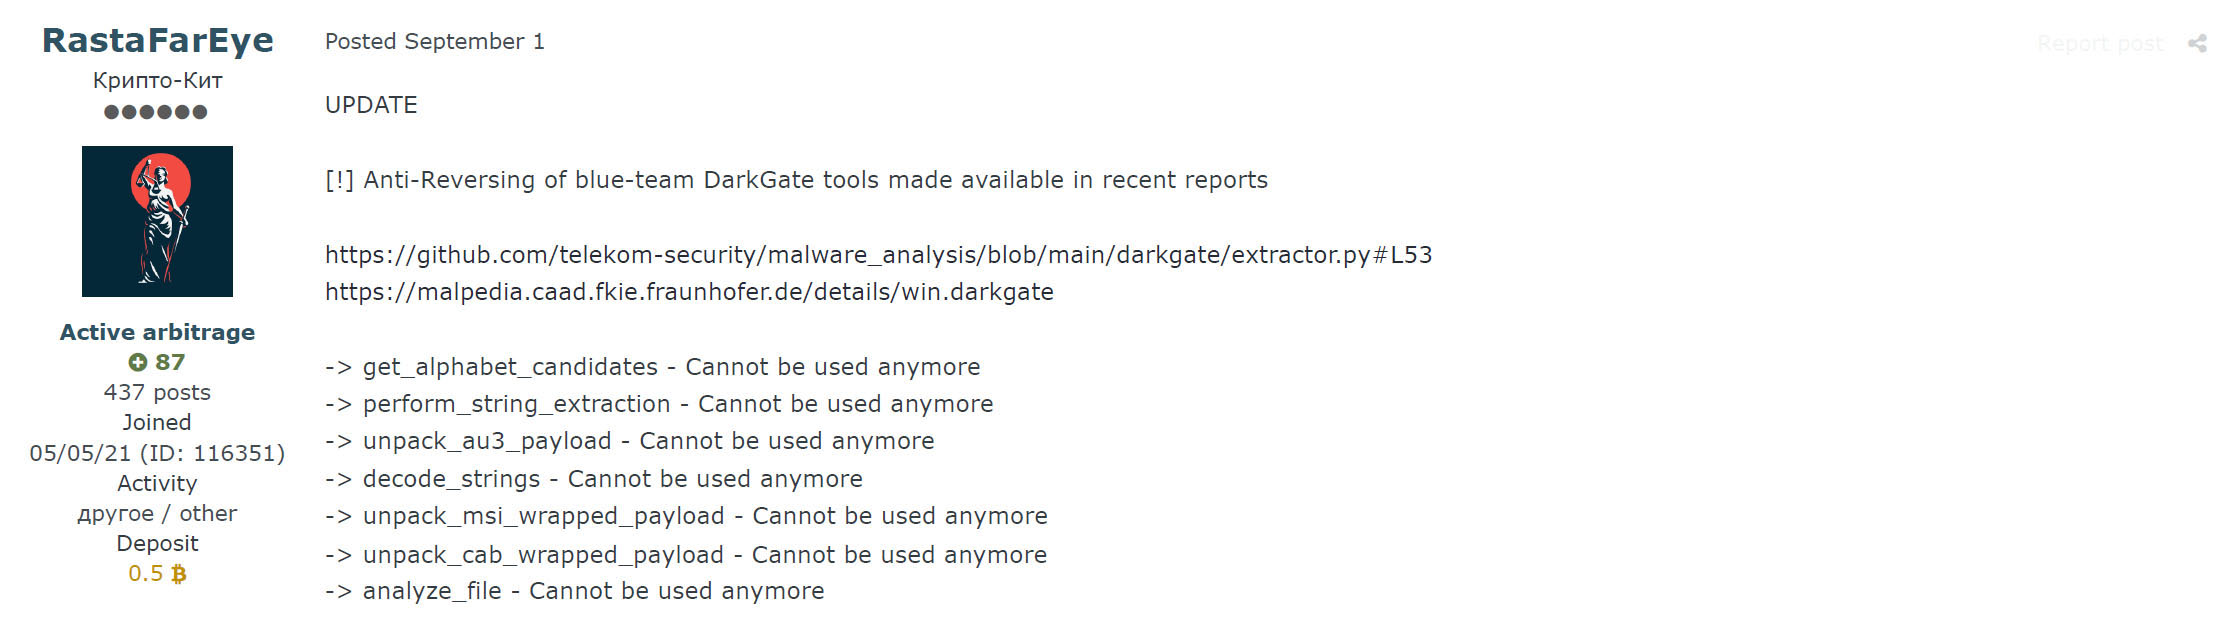 Figure 3: RastaFarEye mentions some DarkGate analysis performed by security companies and researchers. Also, he states that several changes have been applied to break the security tools developed by them.